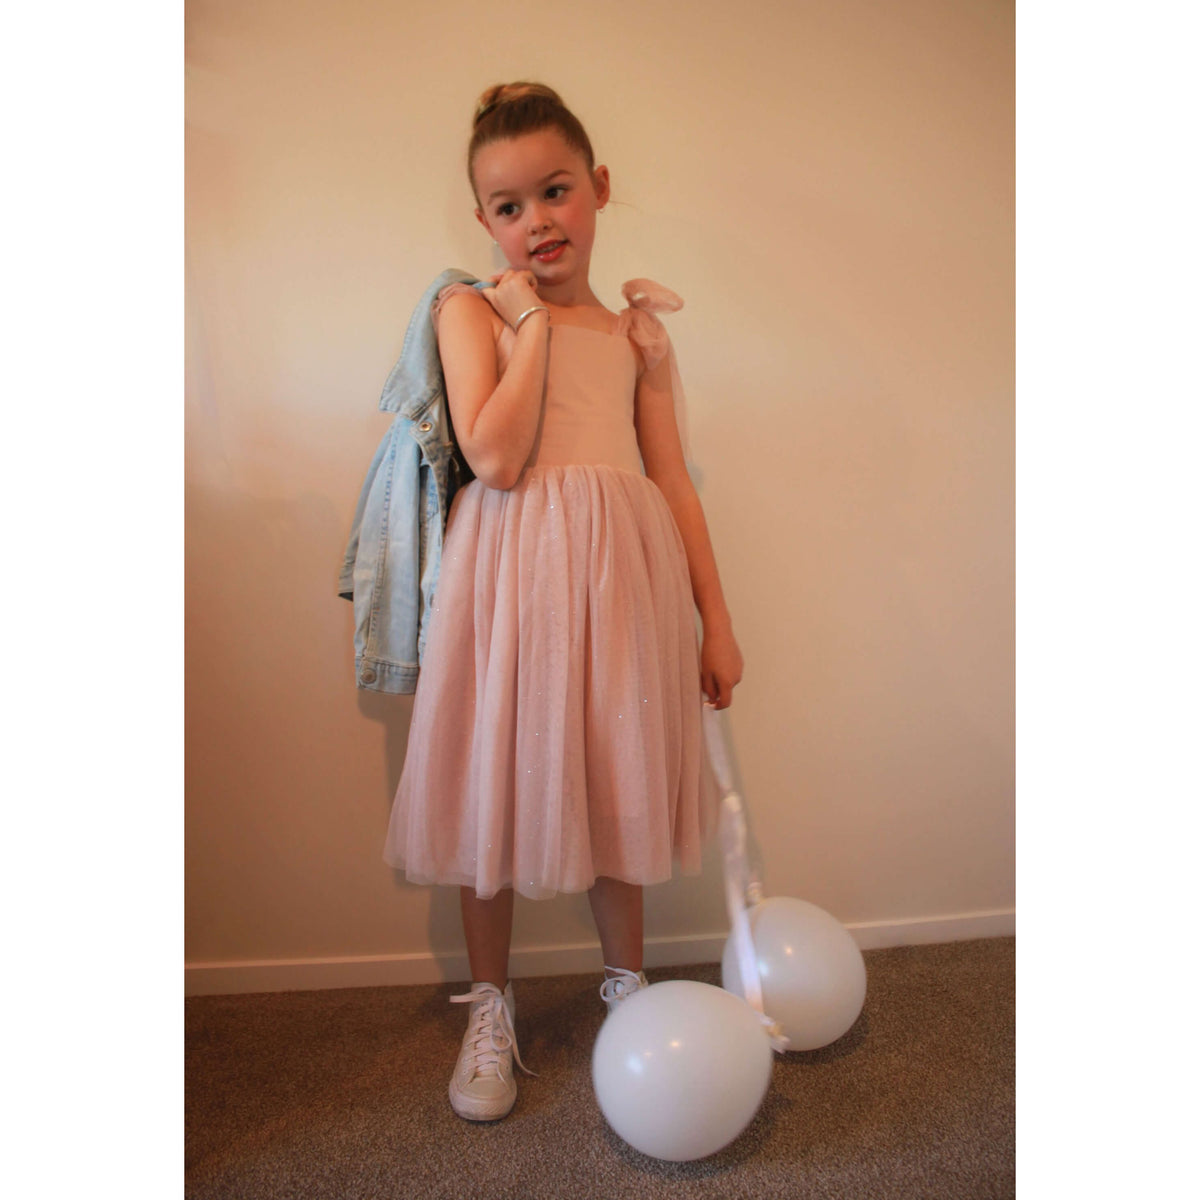 Rosie tulle girls dress worn by a young girl. She holds a denim jacket over her shoulder with balloons at her feet. The tulle skirt of this flower girl dress has some glitter in it.